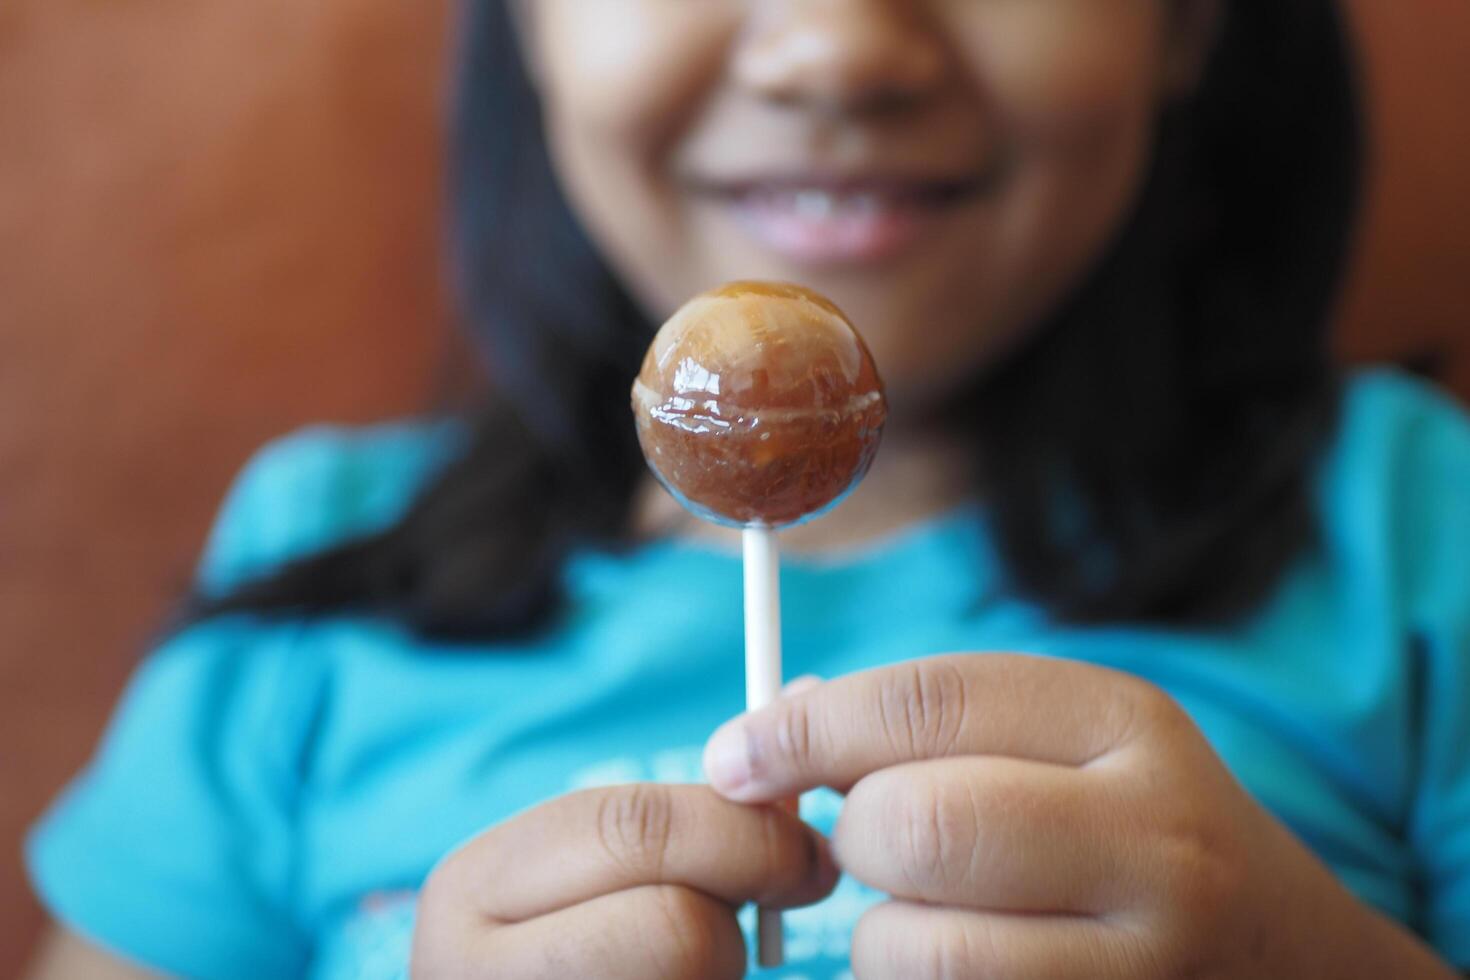 child is licking colorful candy on stick, photo